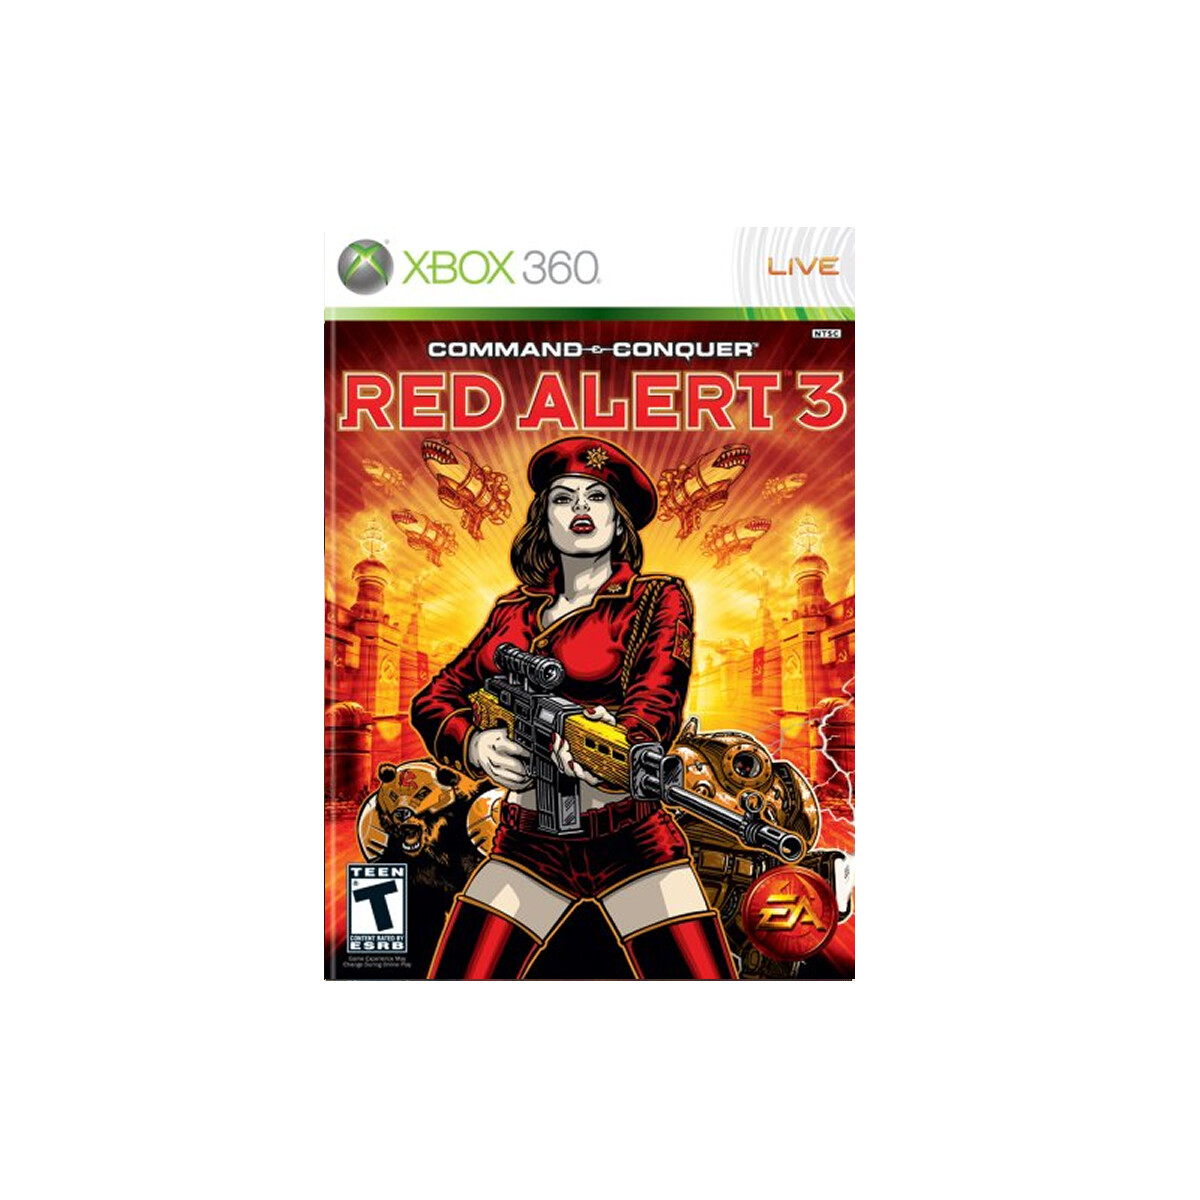 XBOX 360 COMMAND & CONQUER: RED ALERT 3 